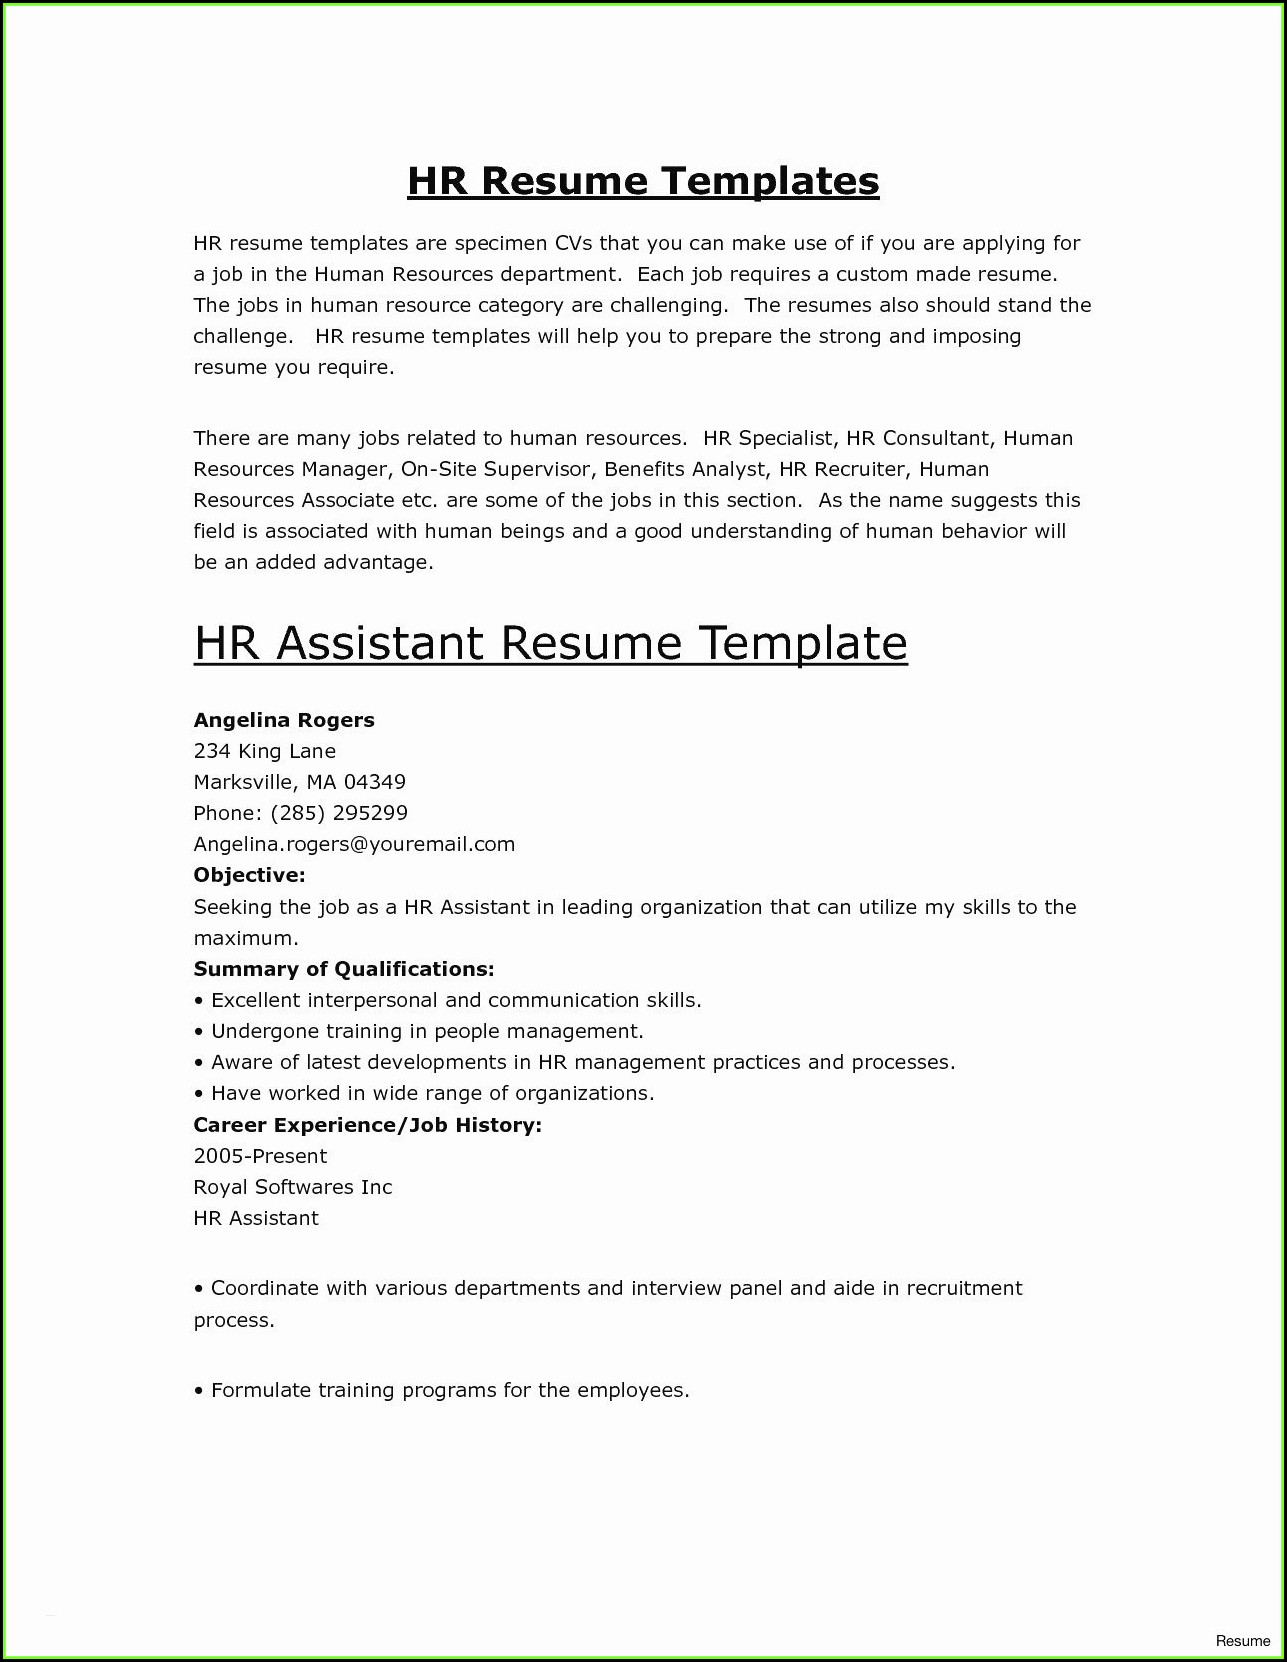 highest-rated-resume-templates-resume-resume-examples-1zv8mwe23x